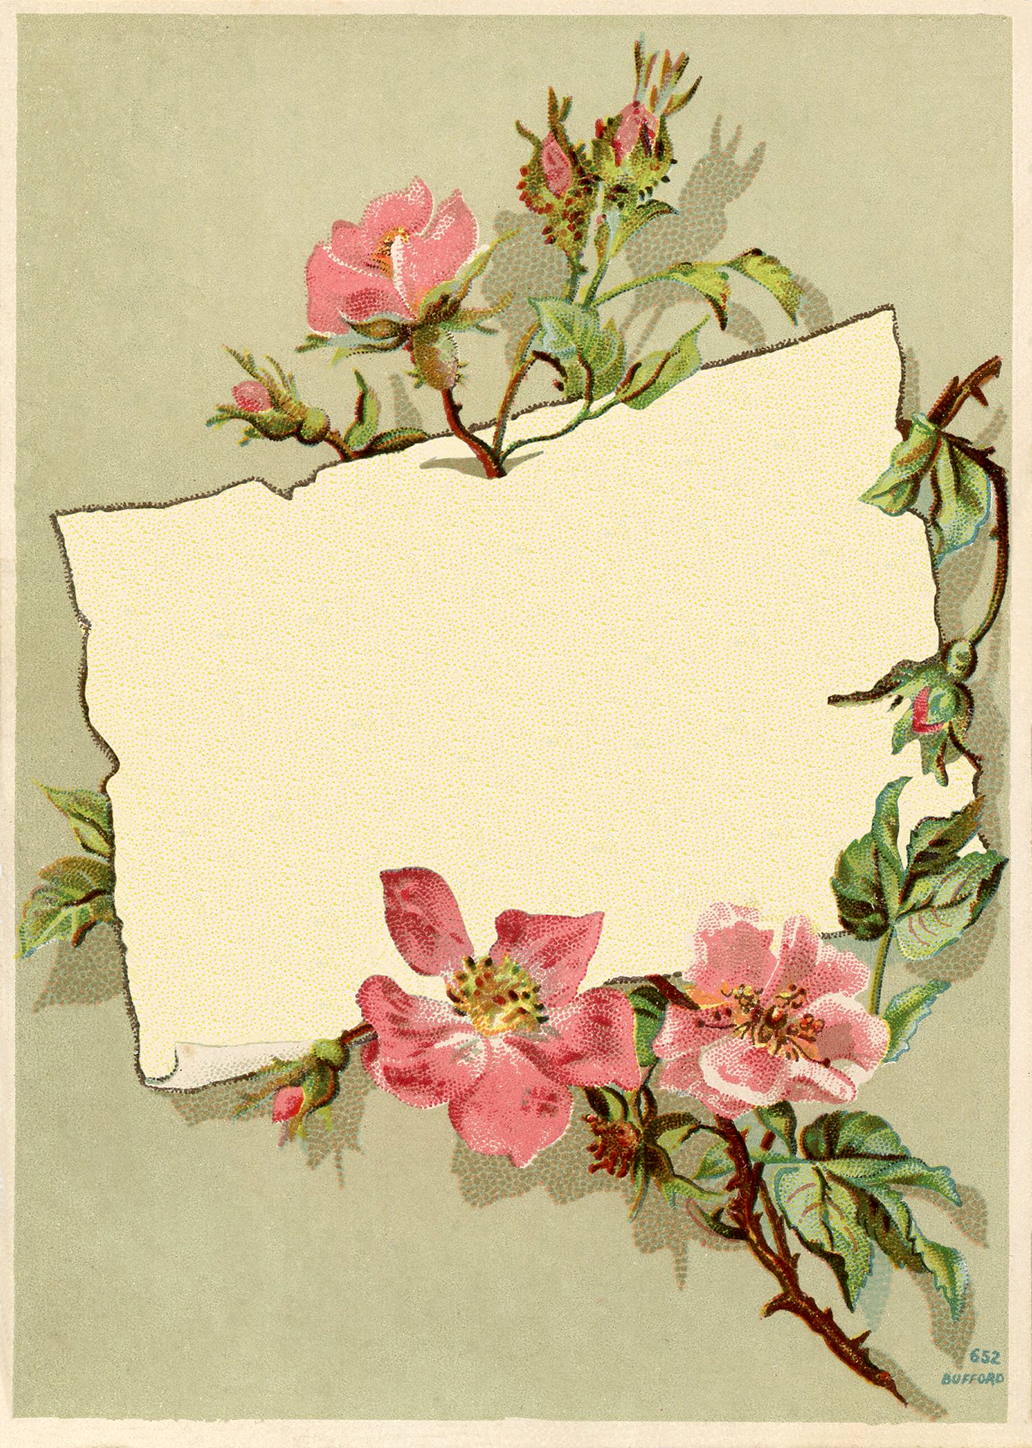 Vintage Rose Frame Image The Graphics Fairy